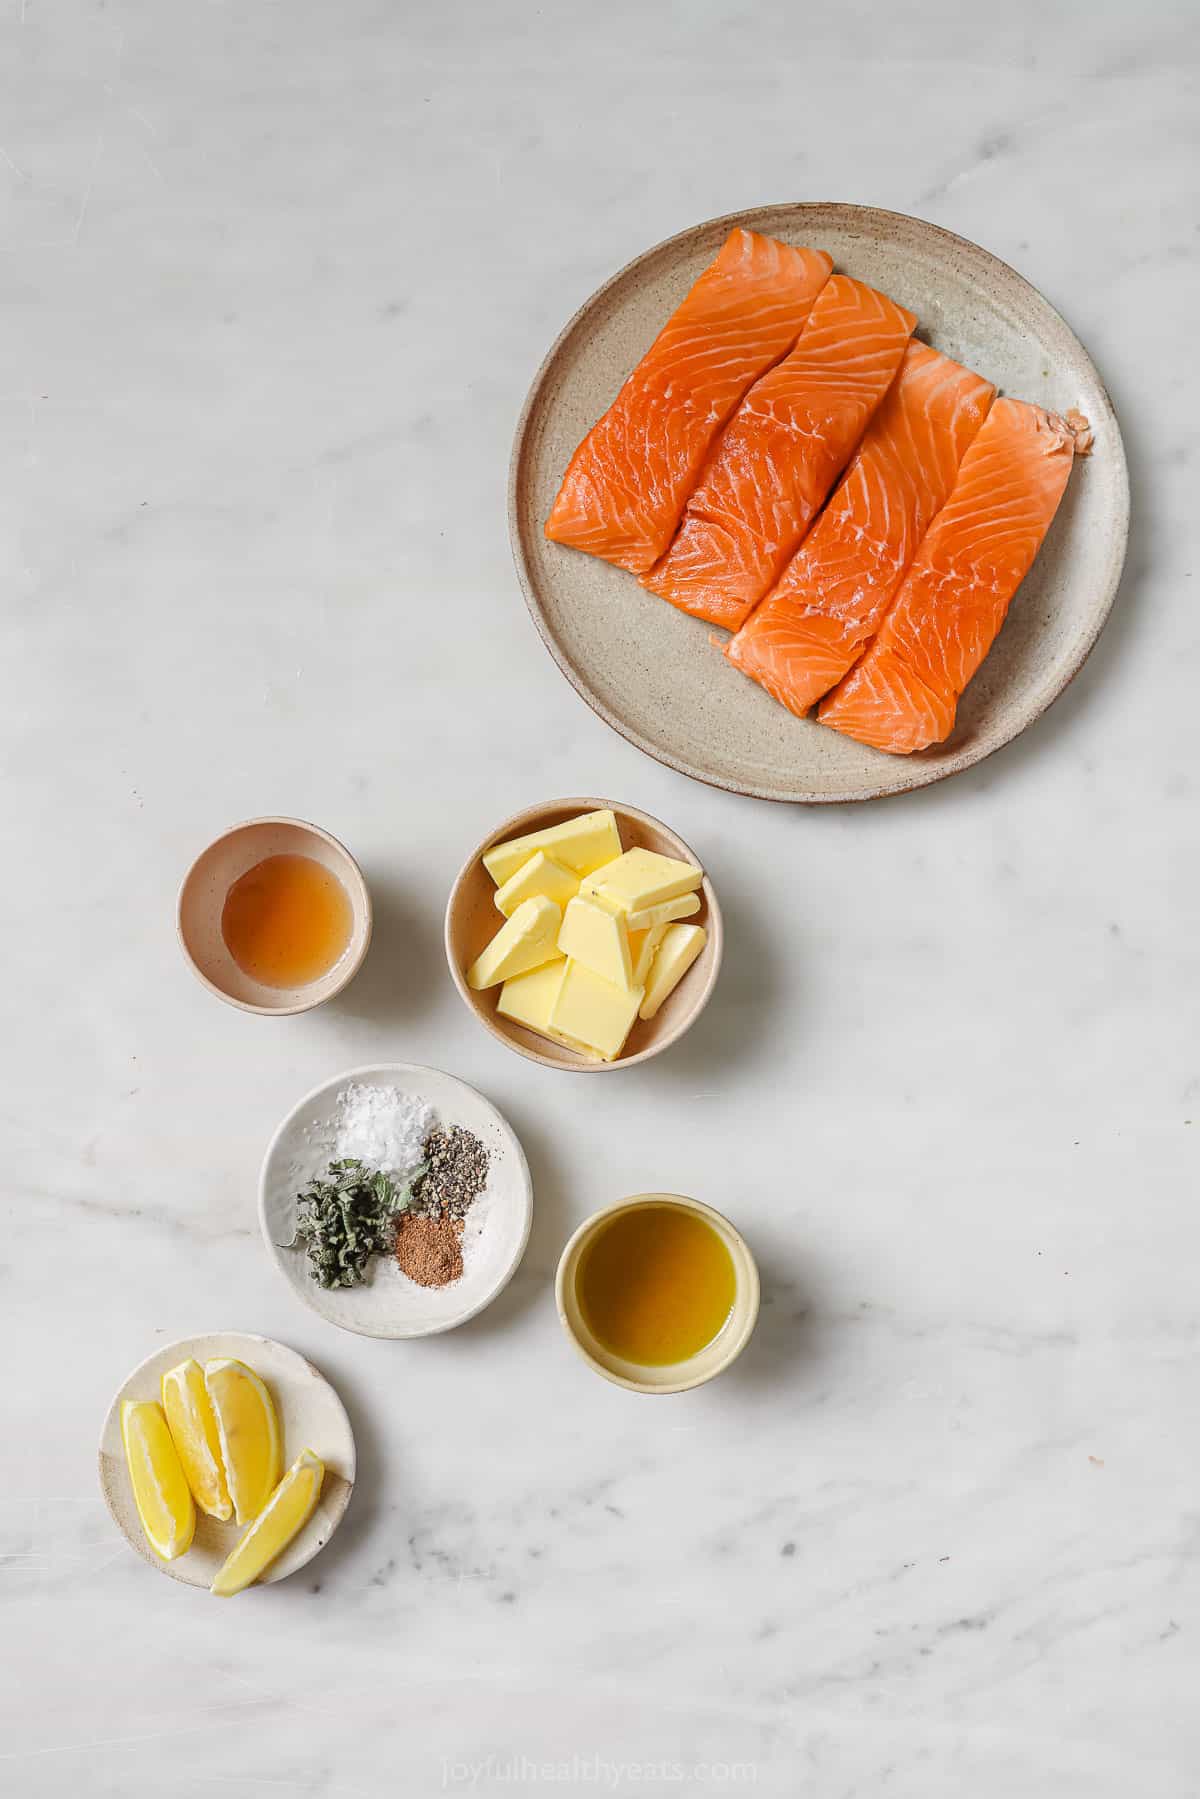 Ingredients for pan seared salmon.